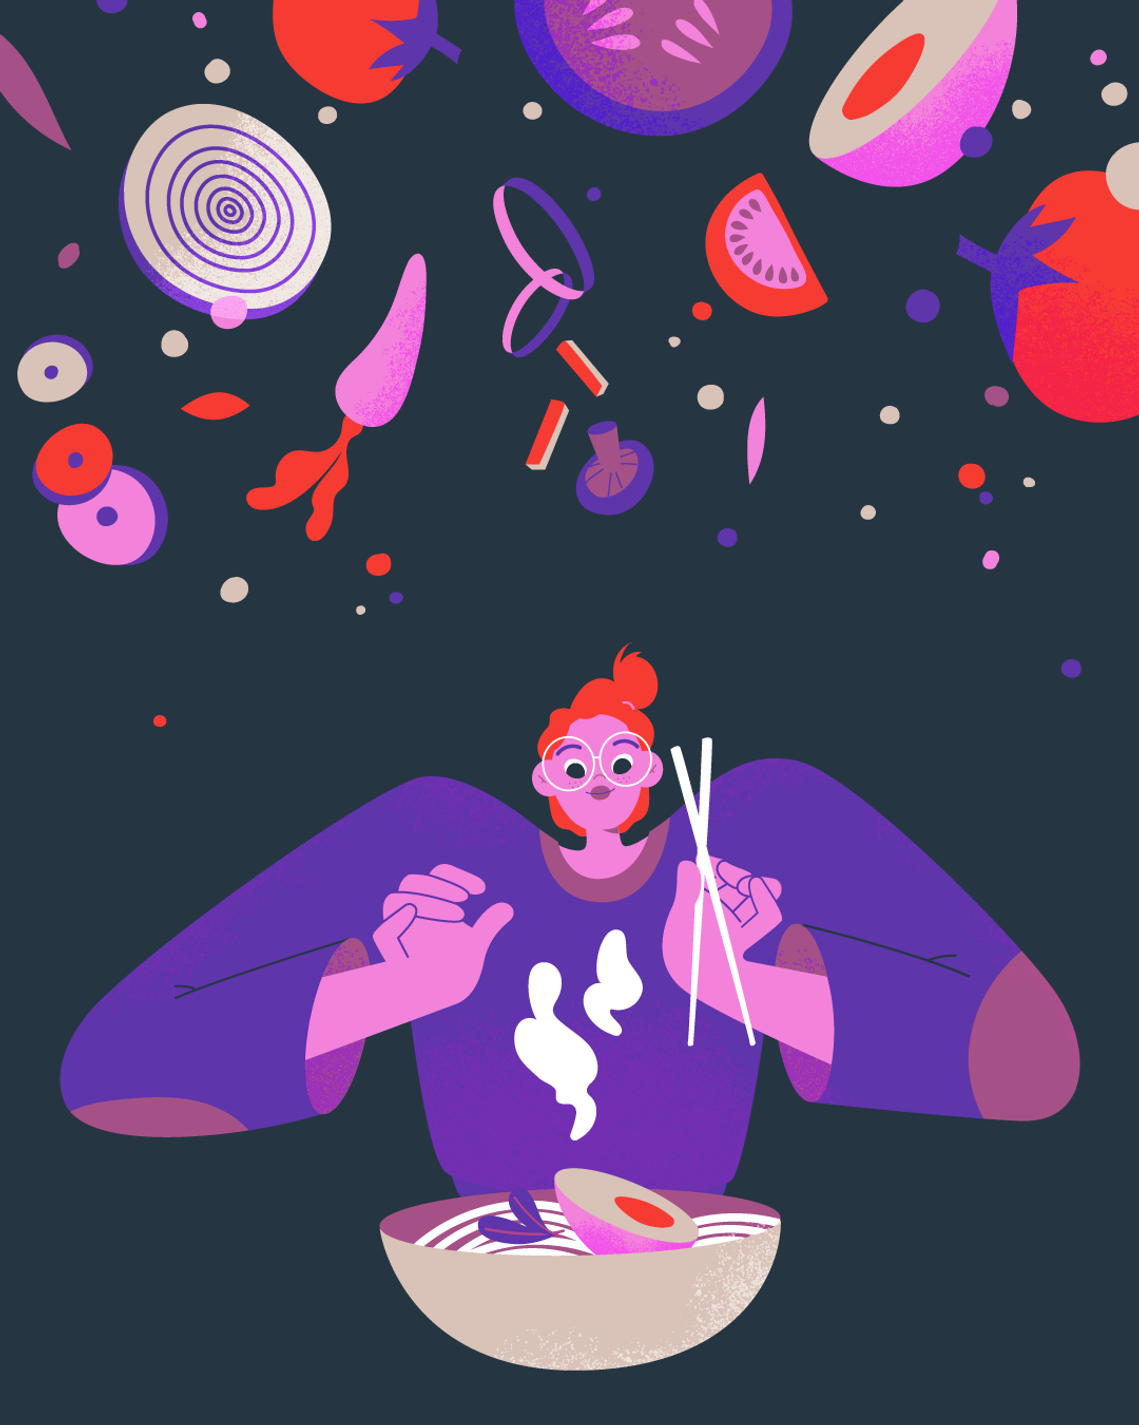 Red-haired gourmet staring at steamy japanese noodle bowl. A round of vegetables hangs above her head